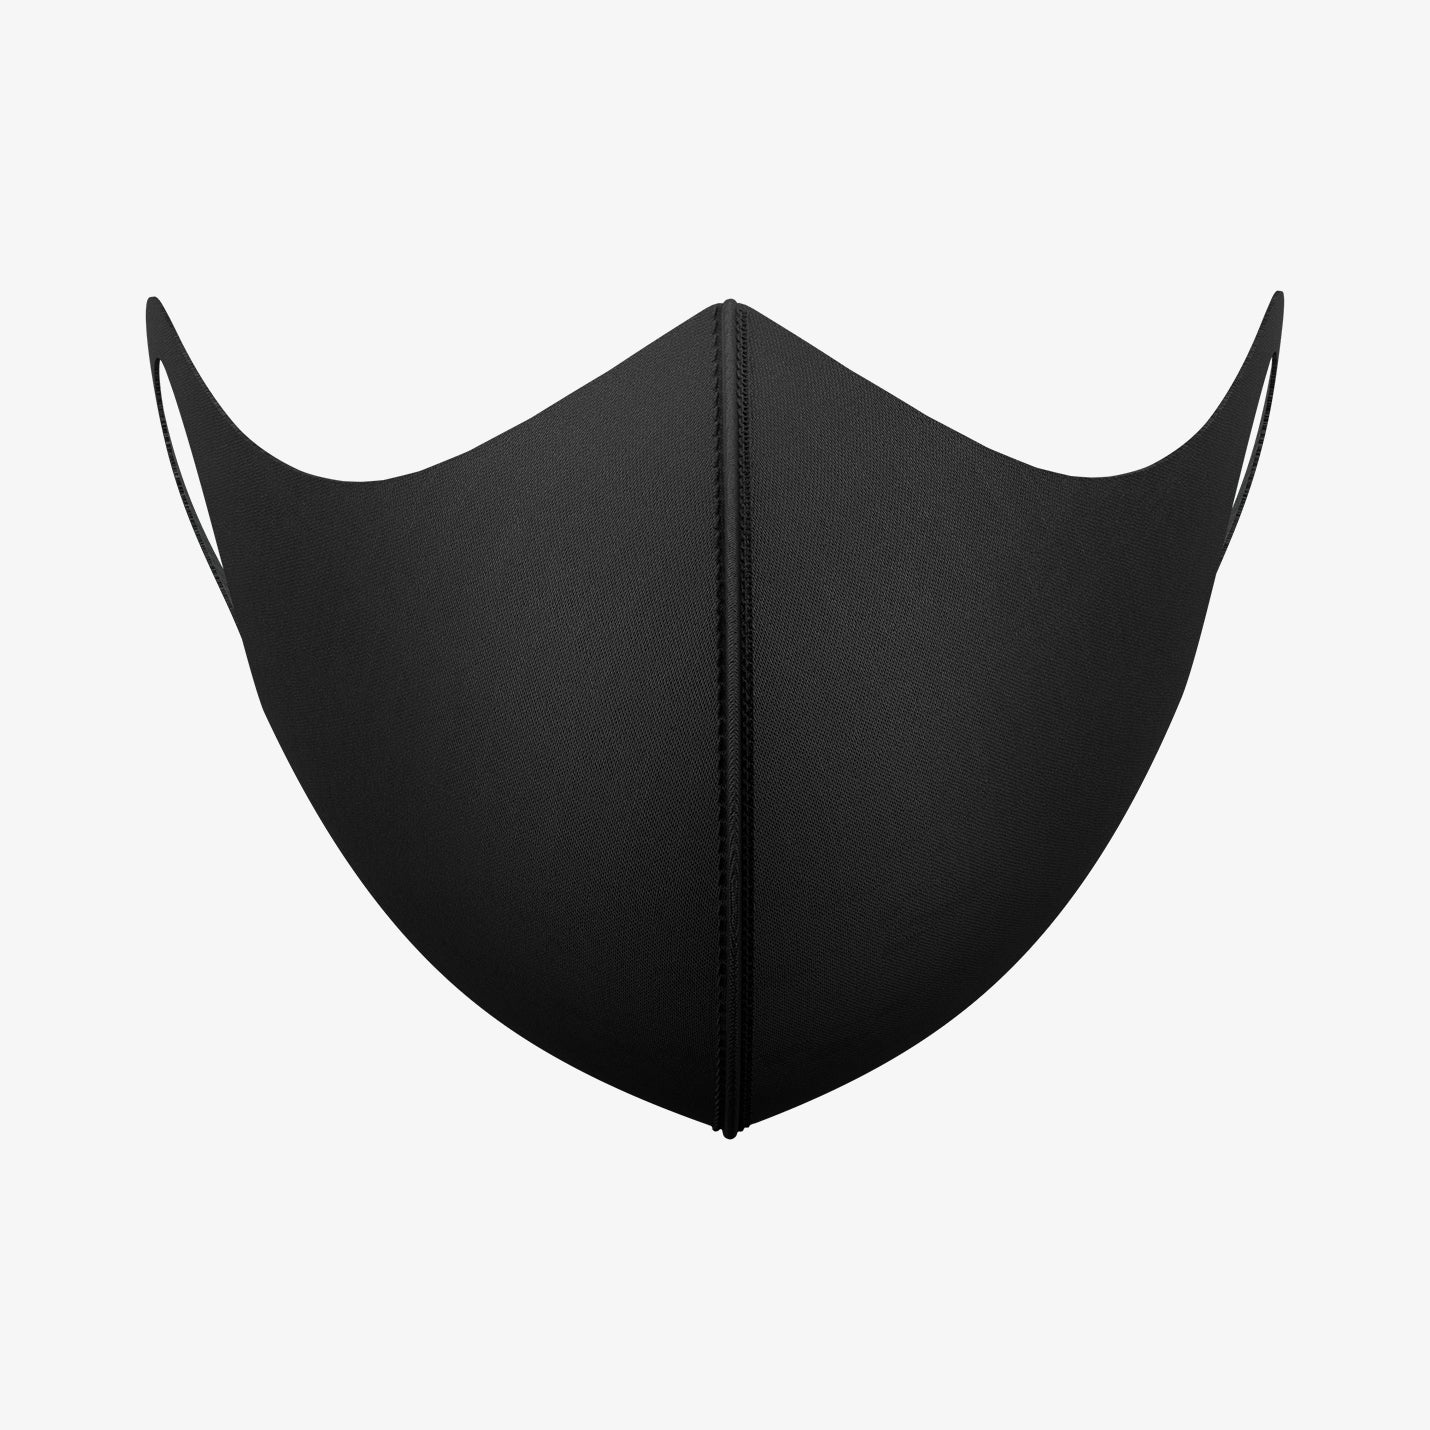 AHP01876 - Air Mask in black showing the front